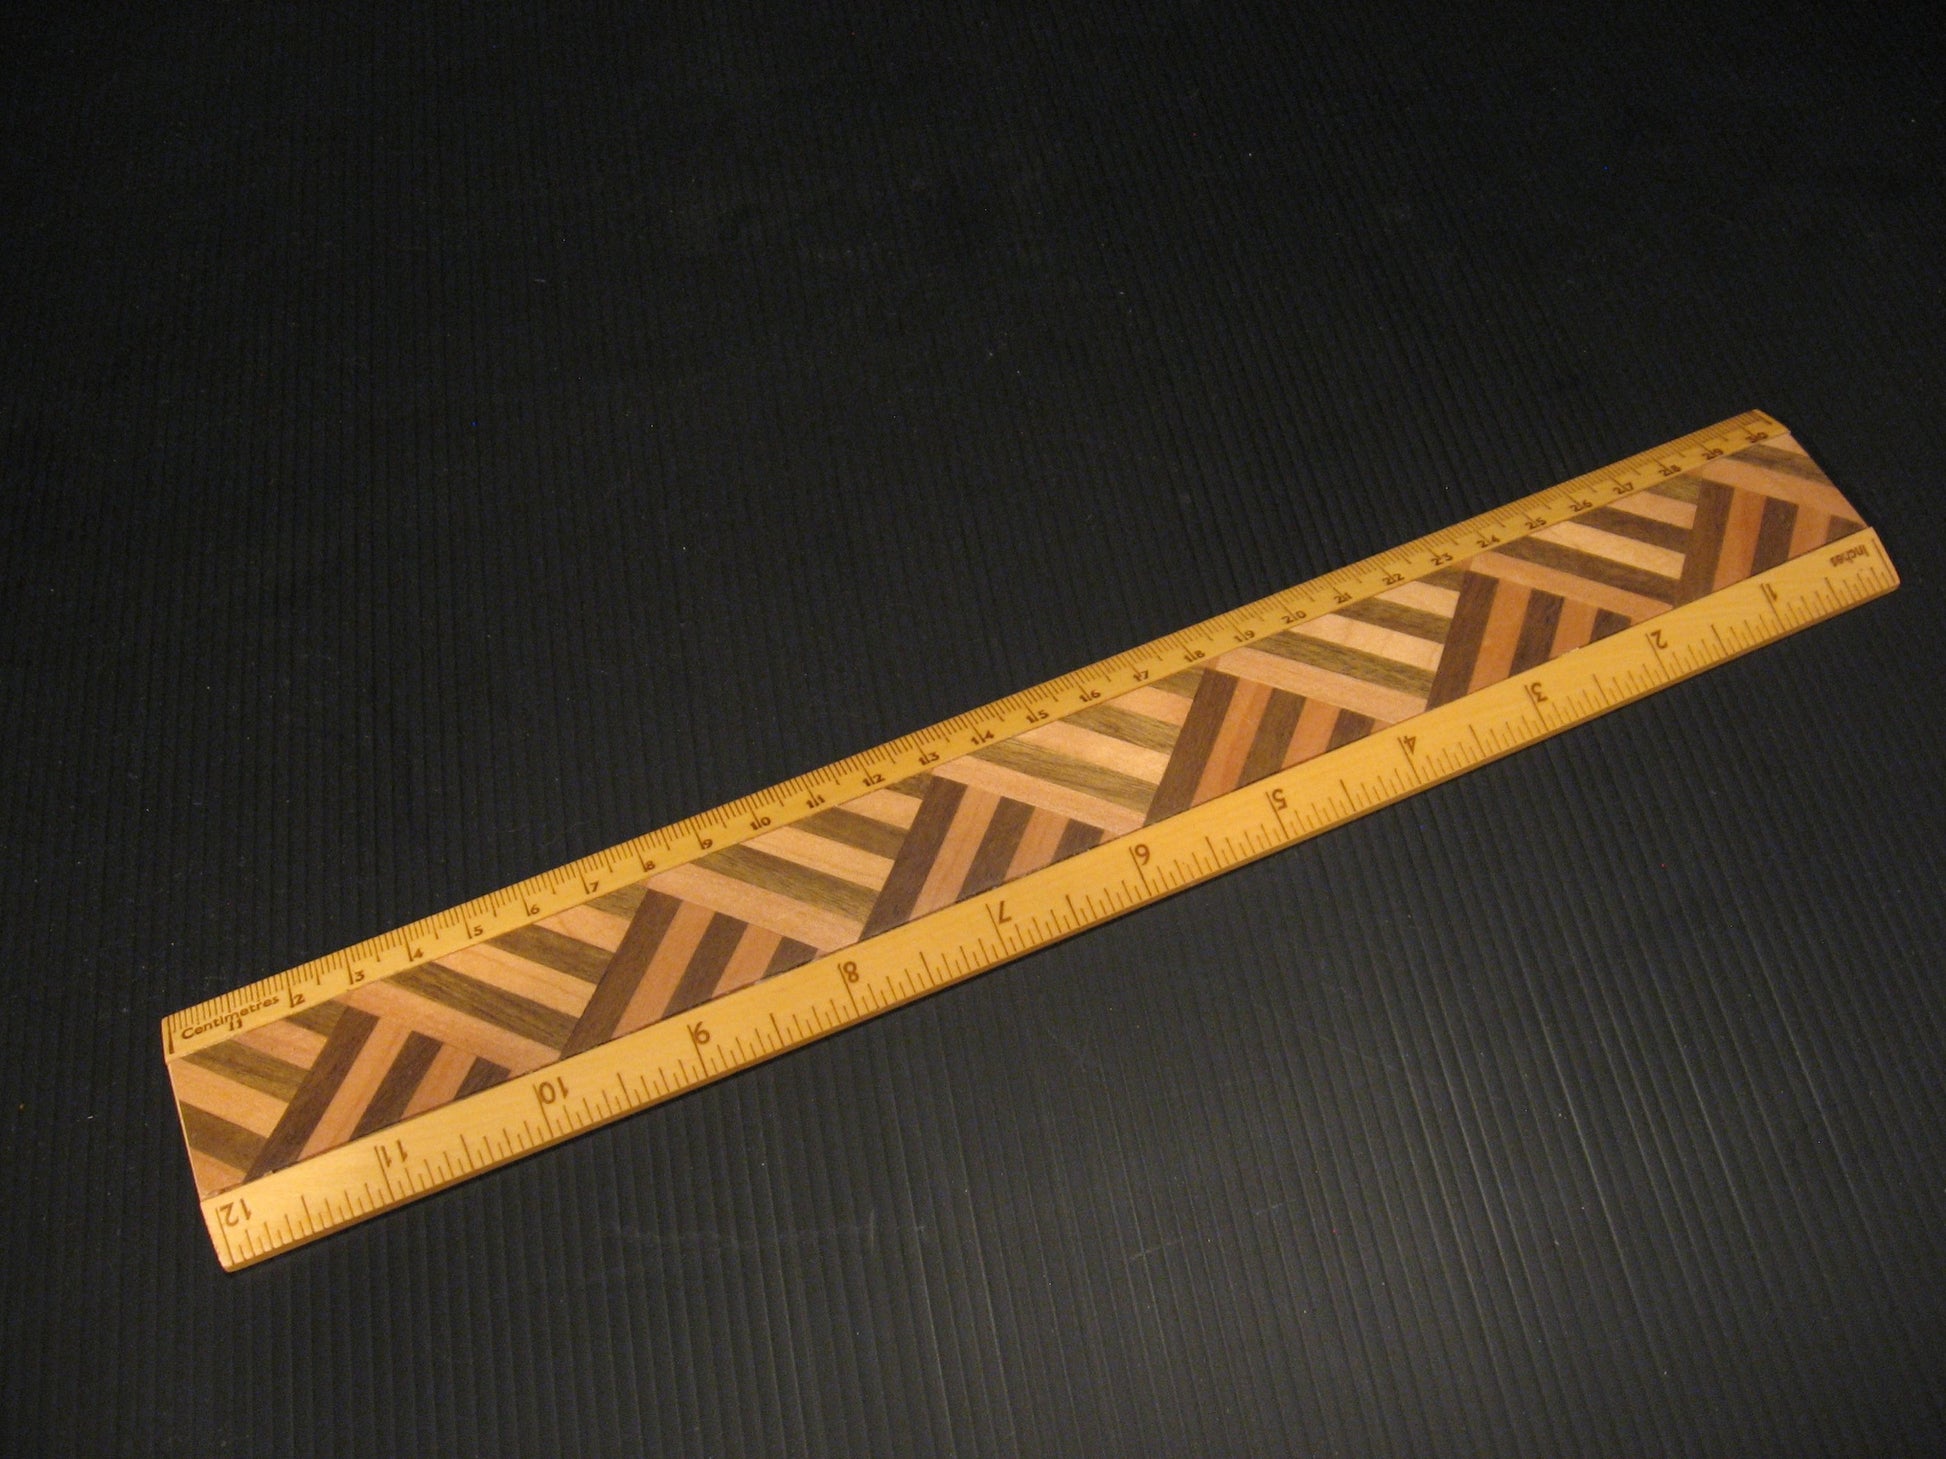 Ruler from NZ Native Timbers Puriri and Tawhai by Timber Arts Silver Fern Gallery